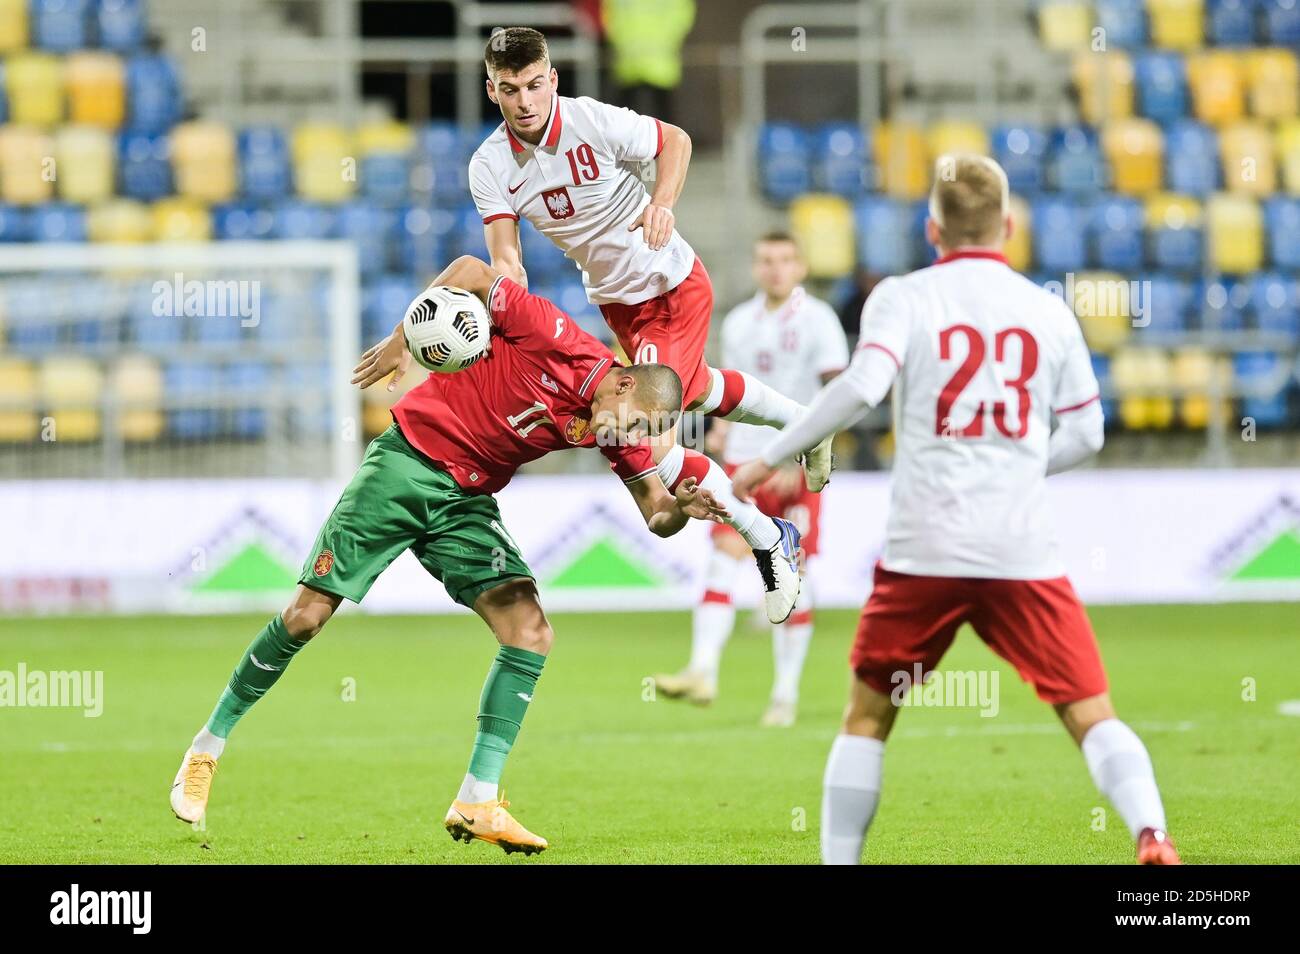 Zdravko Dimitrof of Bulgaria (L) and Karol Fila of Poland (R) are seen in  action during football U-21 European Championships 2021 Qualifiers match  between Poland and Bulgaria at the City Stadium in